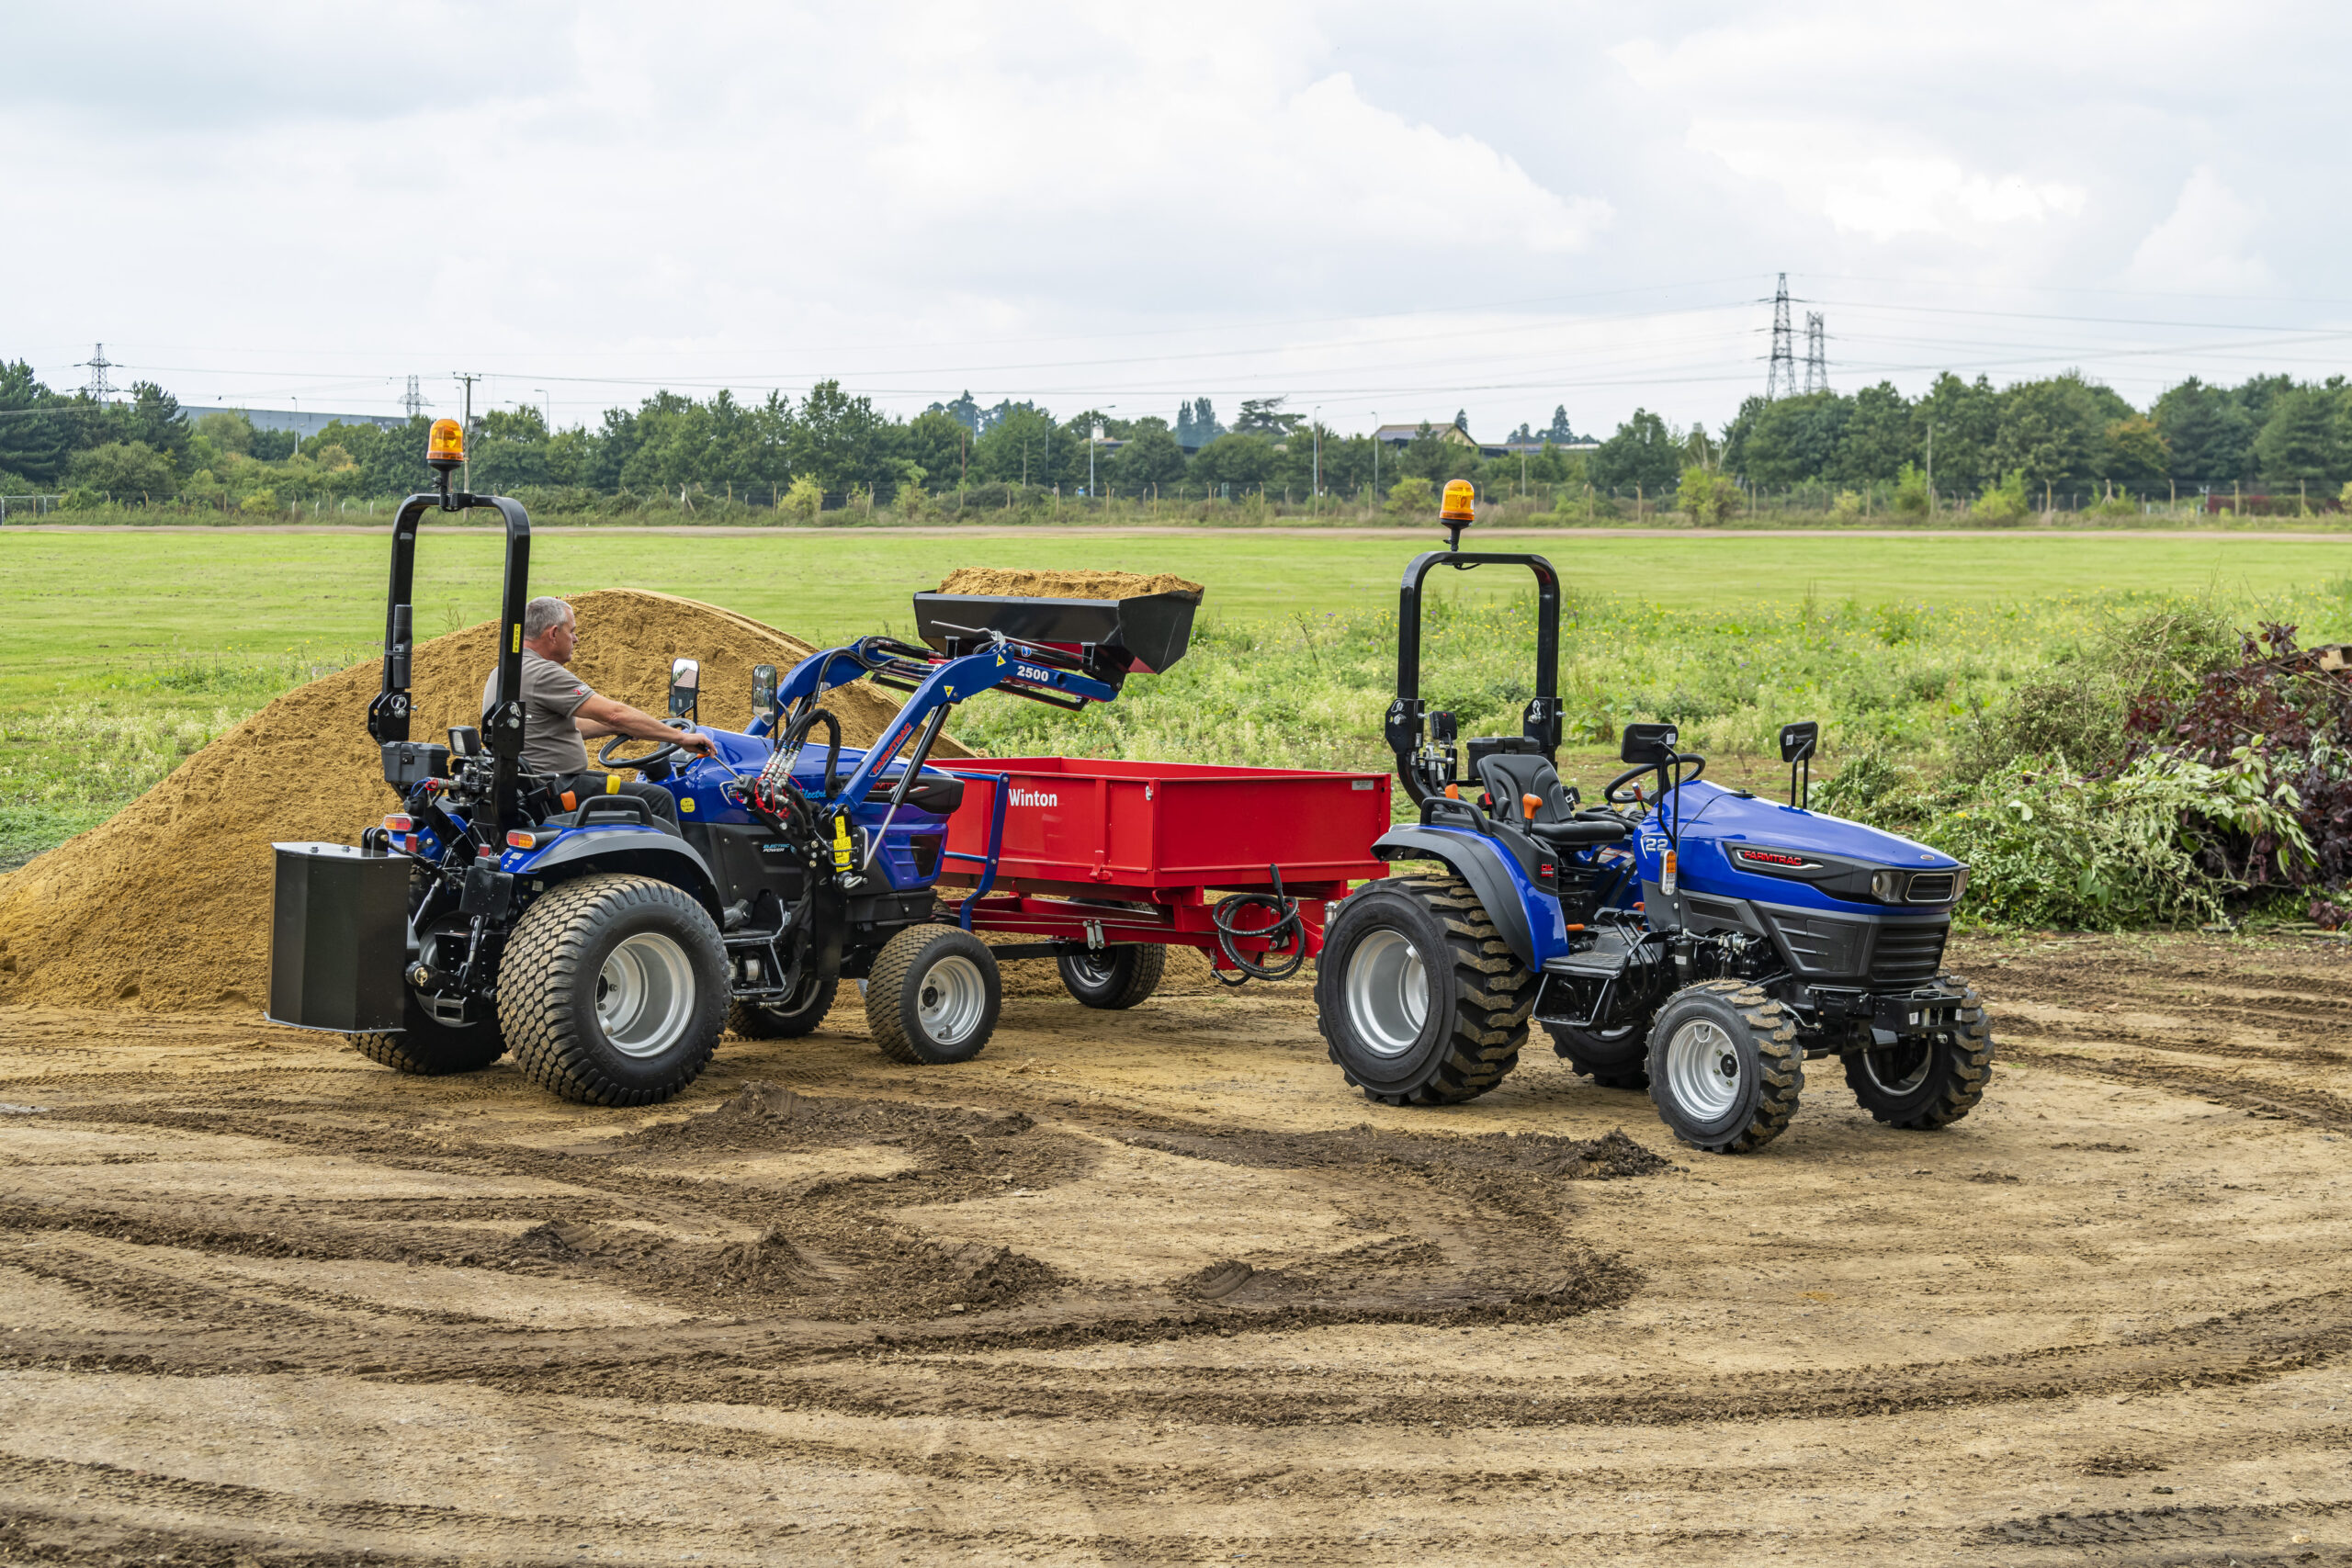 A Farmtrac FT25G being used with a front-loader to move sand, with a Farmtrac FT22 to the side.